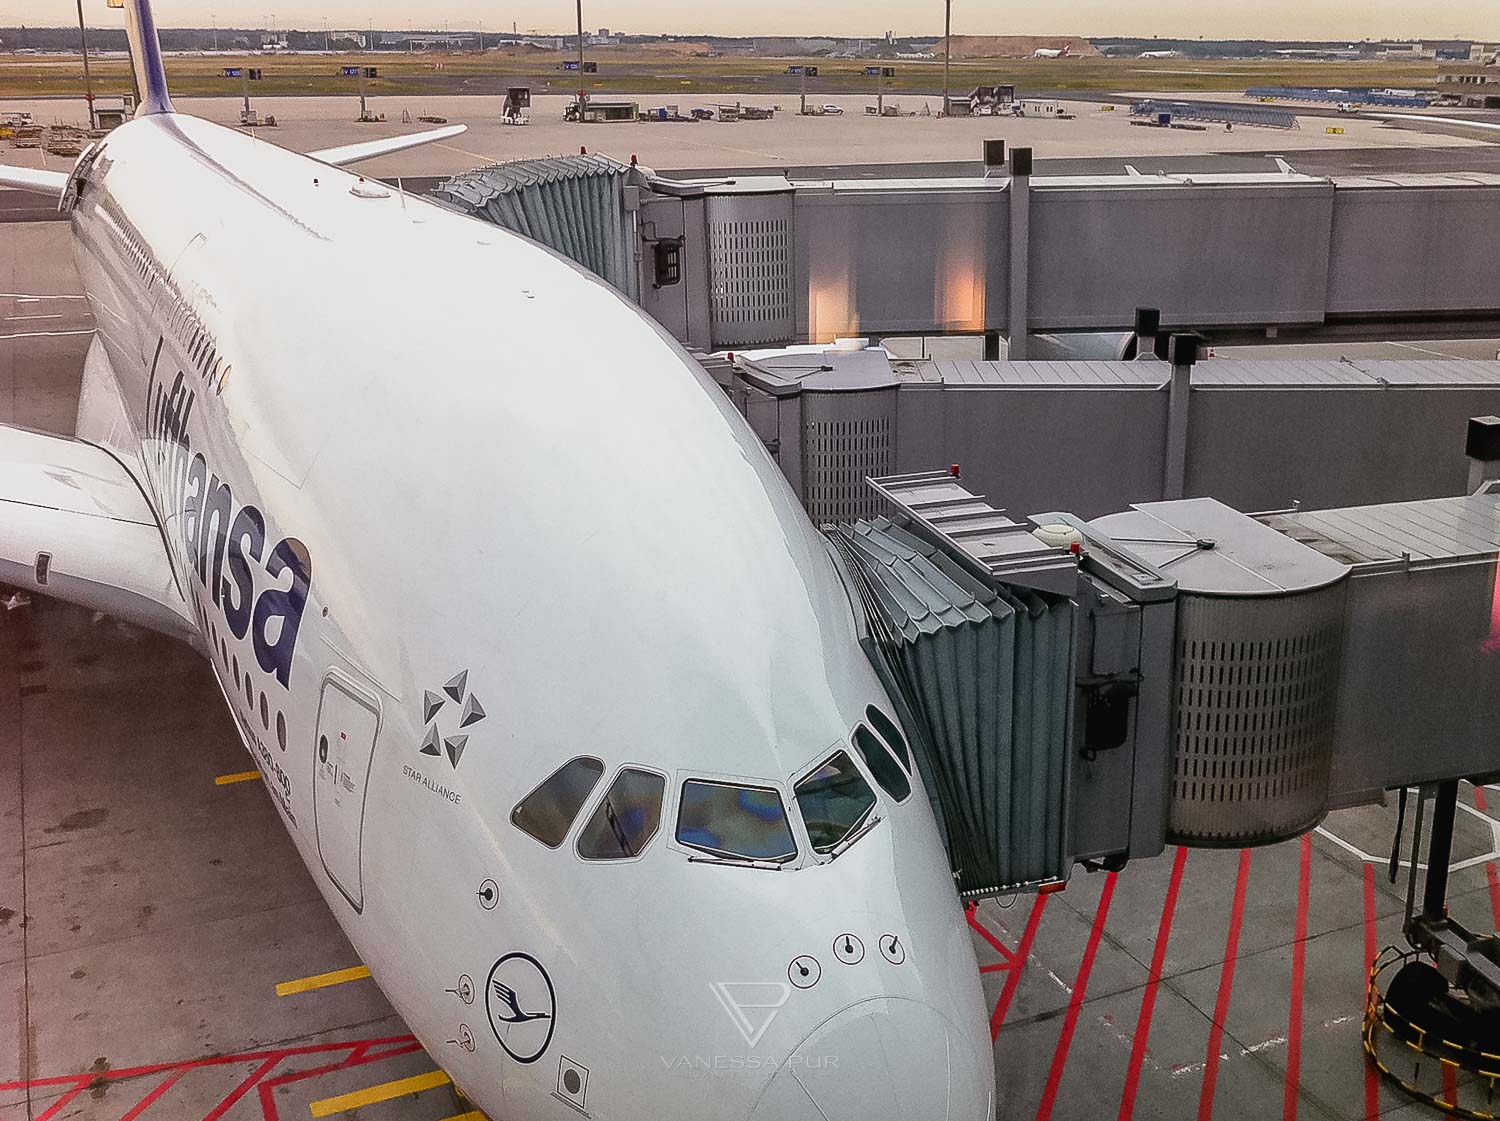 Lufthansa Airbus A380 LH 462 - Inaugural flight - Frankfurt to Miami - Report and experience about the inaugural flight LH462 of the new Lufthansa Airbus A380 from Frankfurt to Miami in Business Class Gate C16